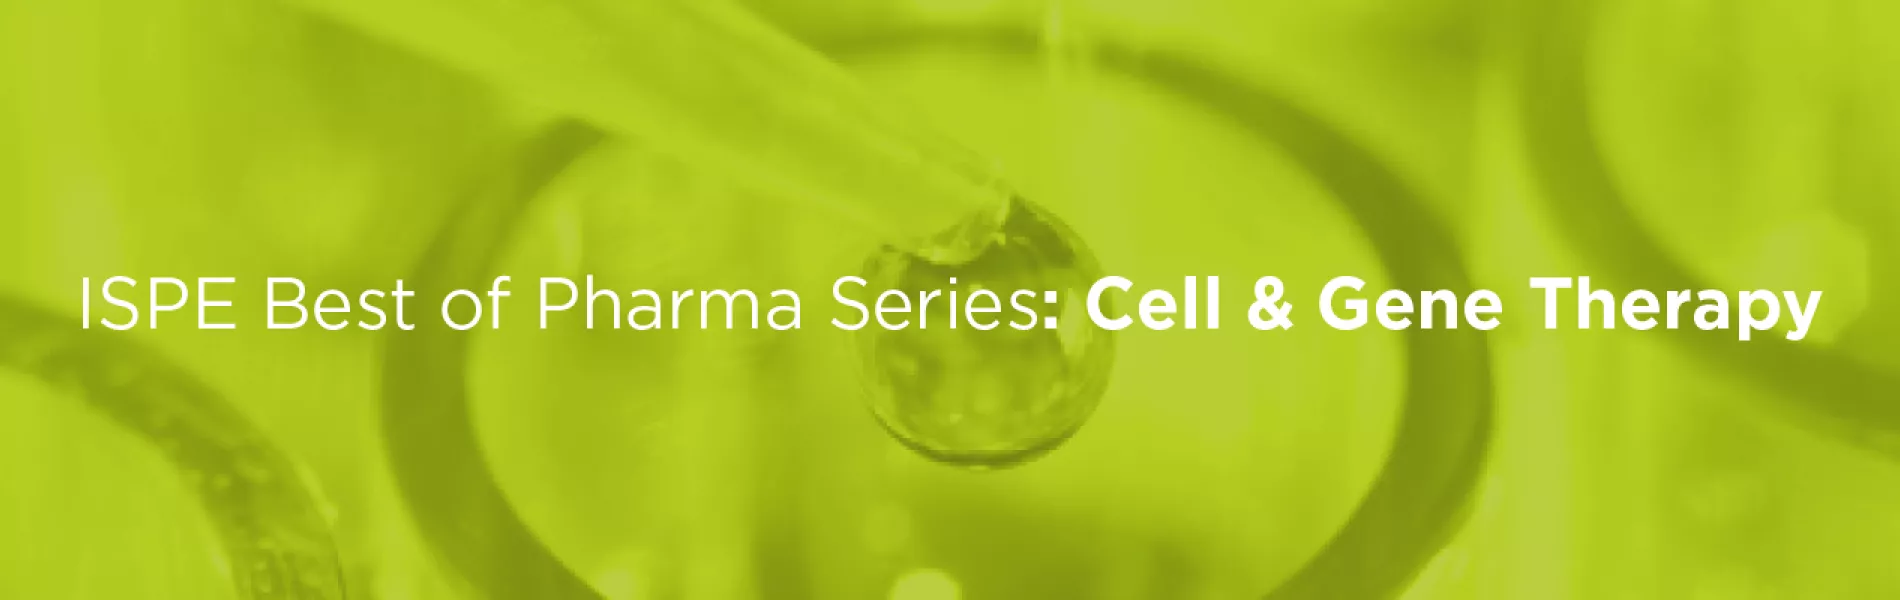 ISPE Best of Pharma Series: Cell & Gene Therapy